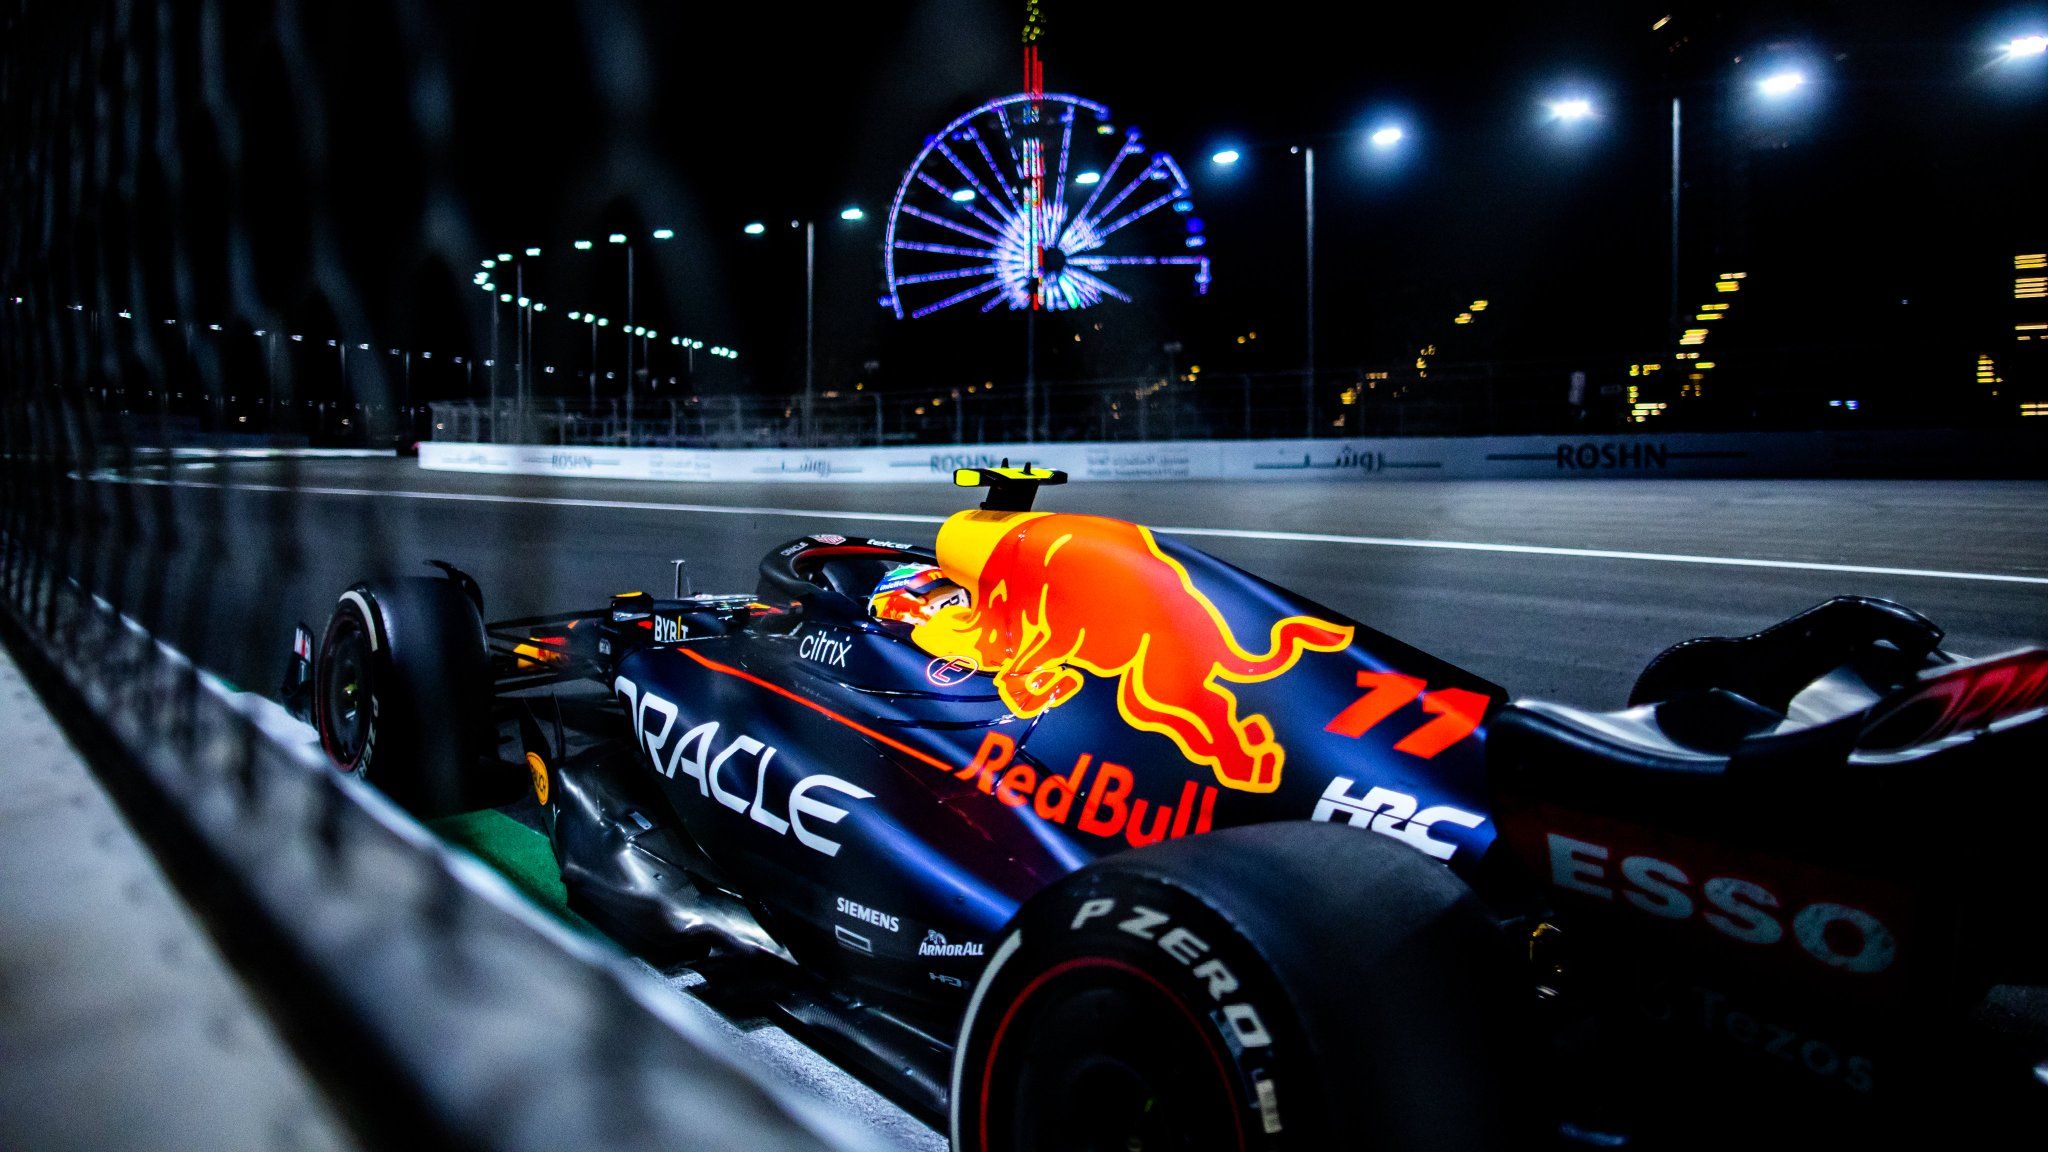 Free download Oracle Red Bull Racing on in 2022 Red bull racing [2048x1152] for your Desktop, Mobile & Tablet. Explore Red Bull Racing 2022 Wallpaper. Red Bull F1 Wallpaper